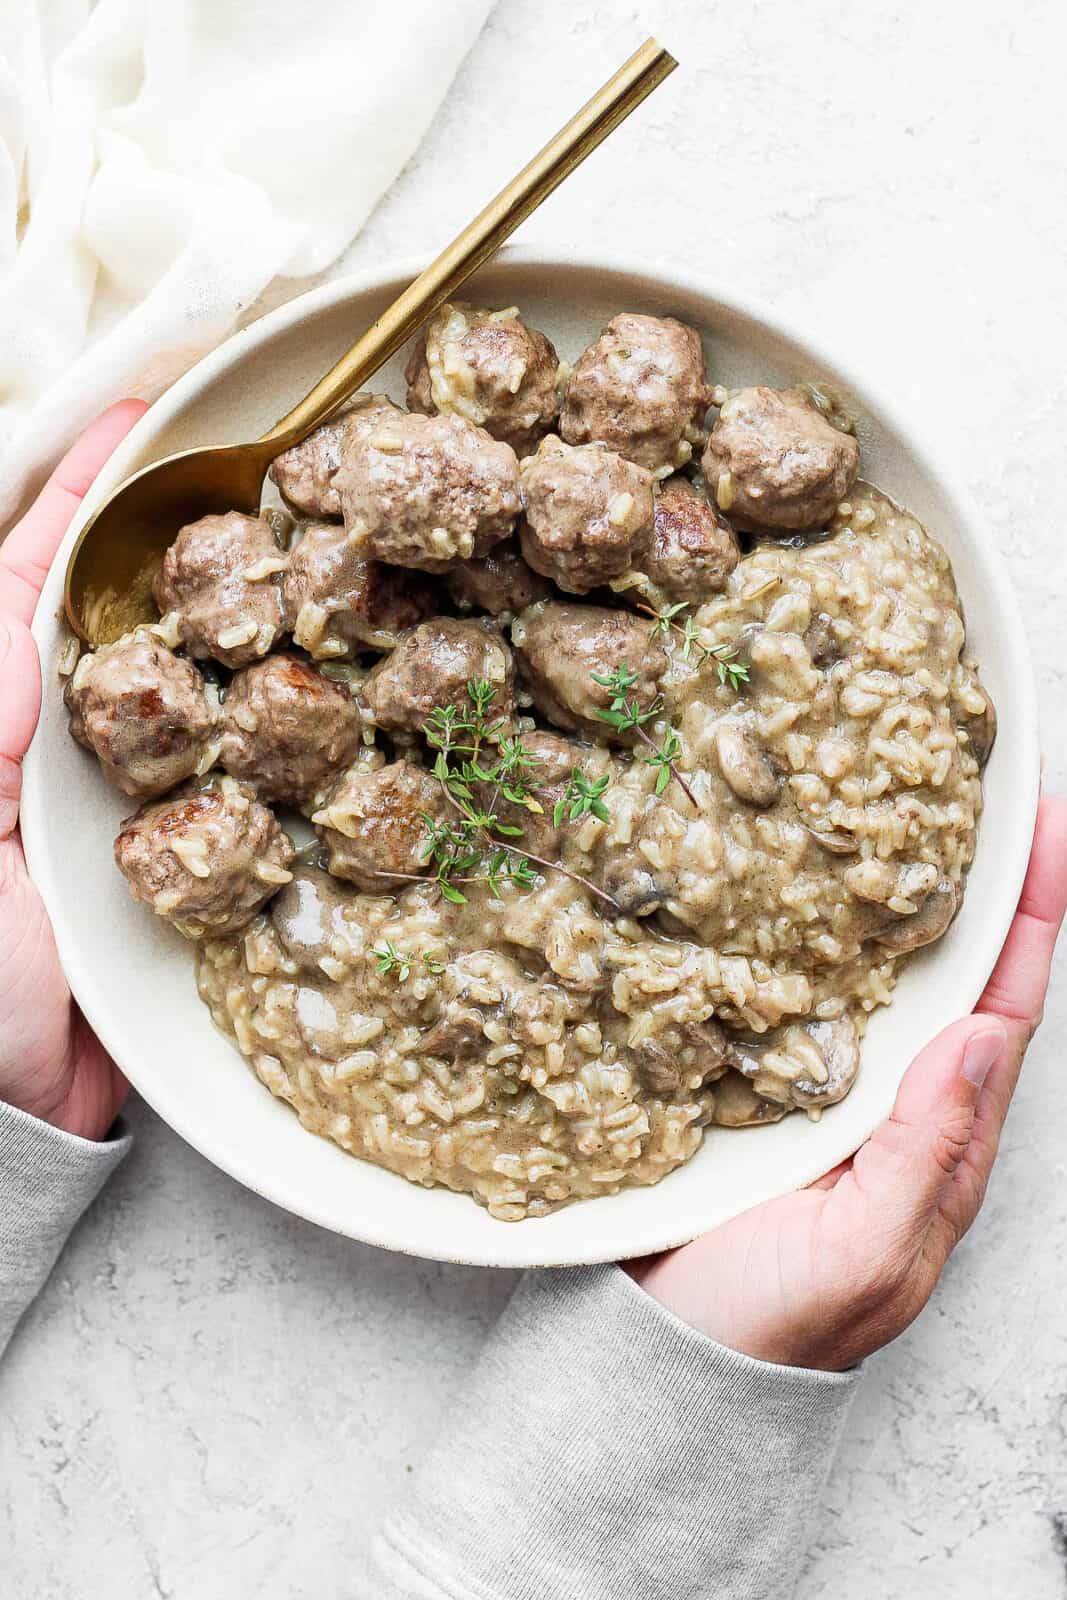 Hands holding a bowl of meatballs and rice.